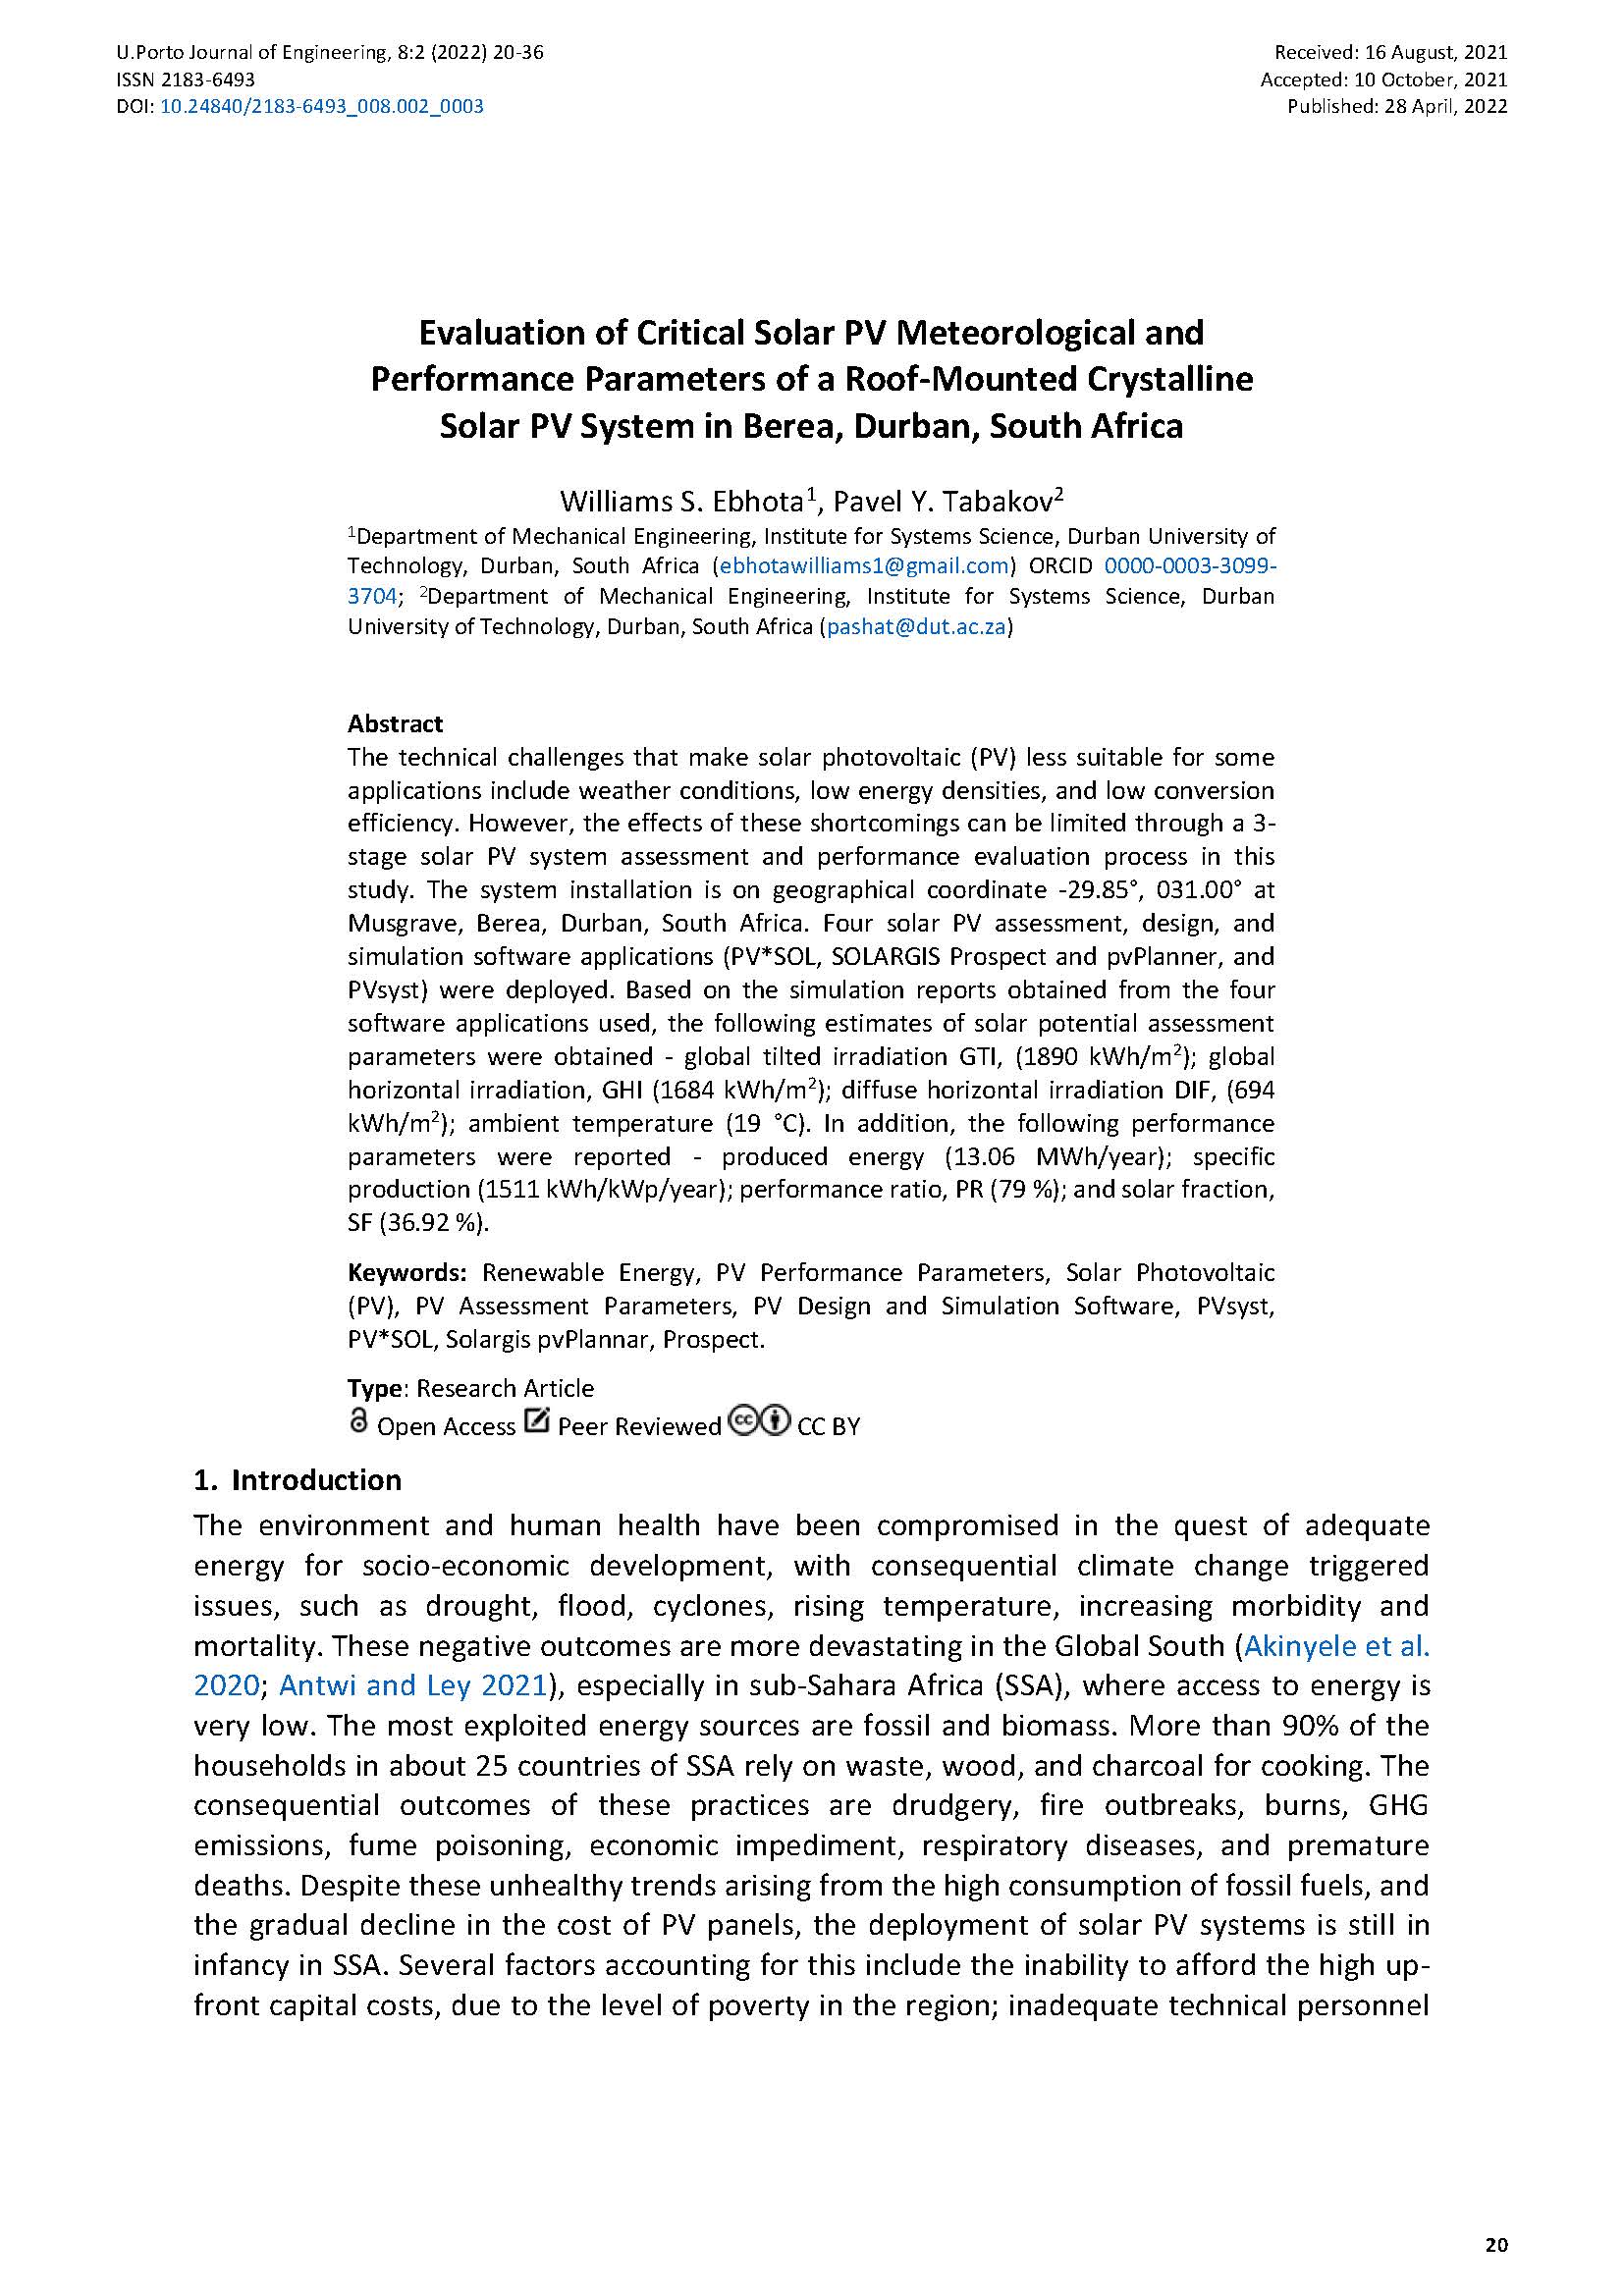 Evaluation of Critical Solar PV Meteorological and Performance Parameters of a Roof-Mounted Crystalline Solar PV System in Berea, Durban, South Africa